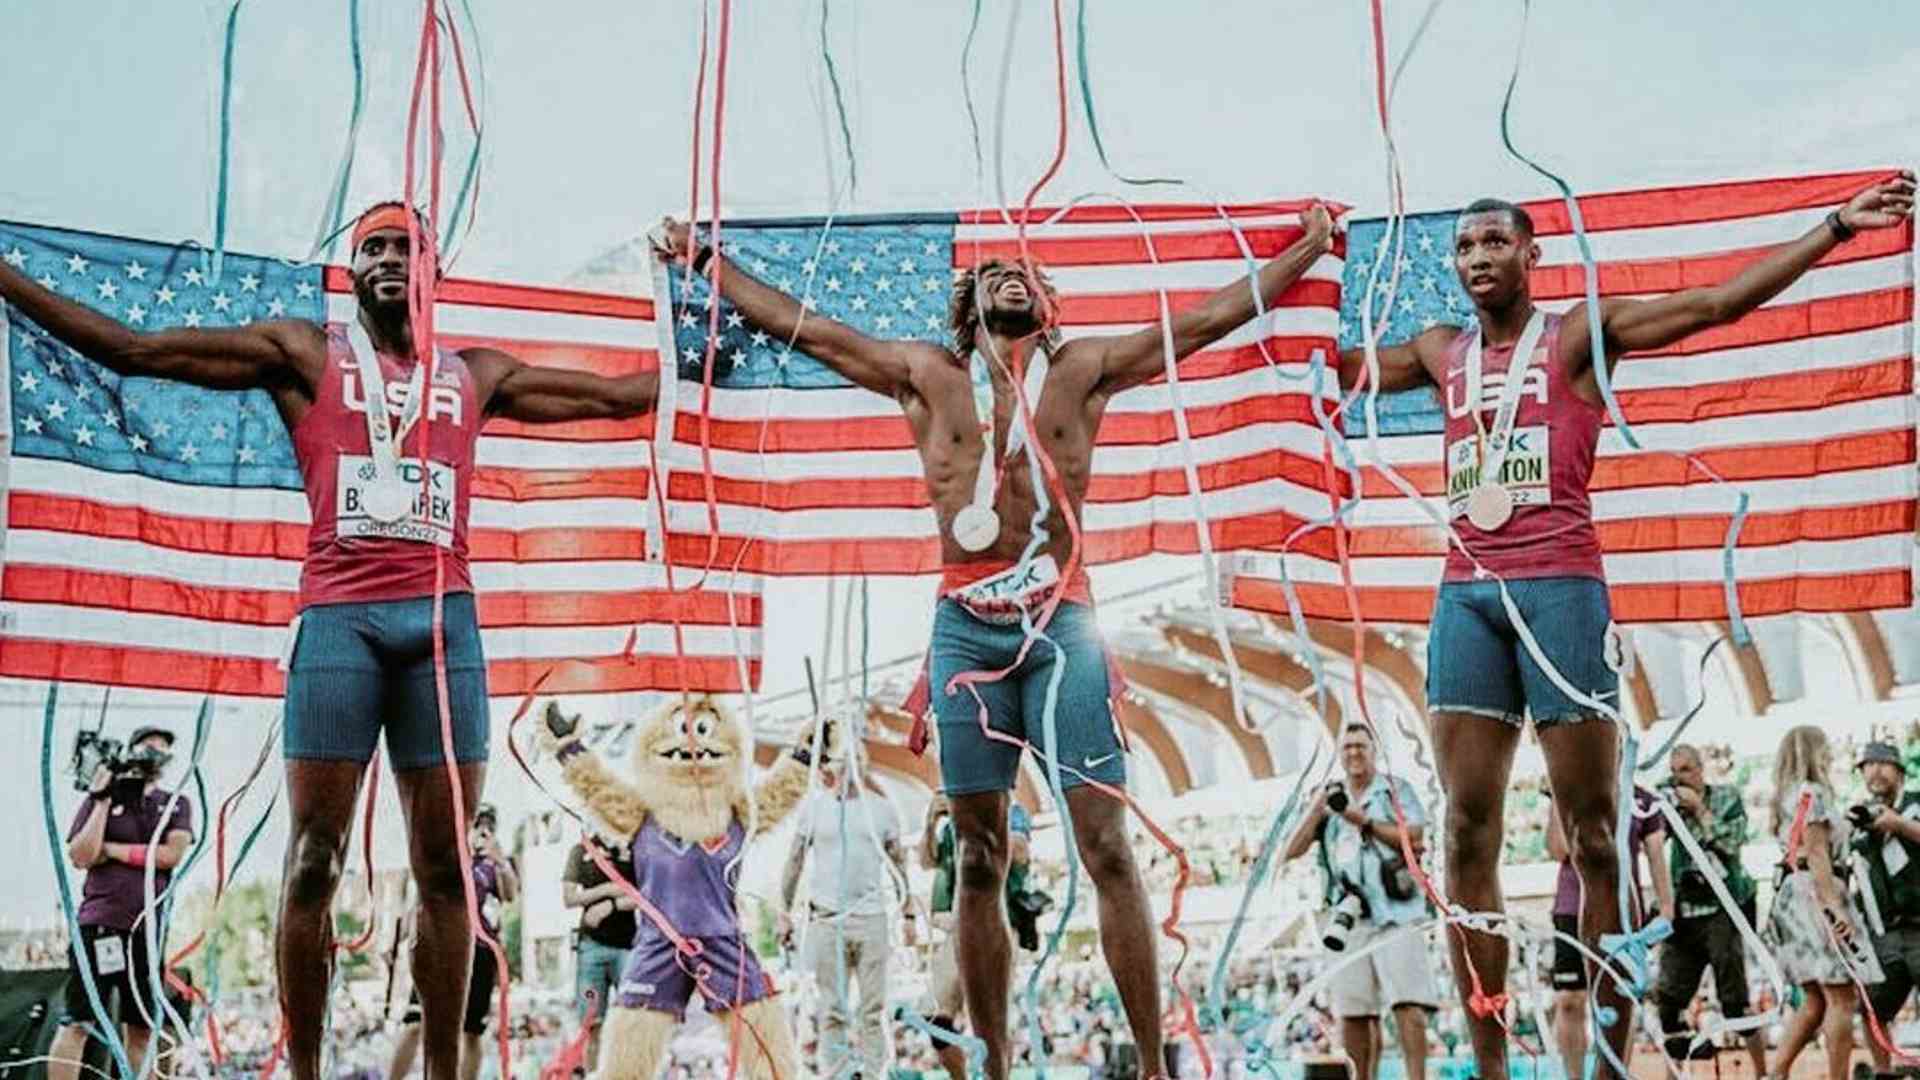 Kenny Bednarek (left), Noah Lyles (center), and Erriyon Knighton (right) swept the 200 m podium for the USA at the World Championships 2022 (Image Credits - Instagram/ @kenny_bednarek)